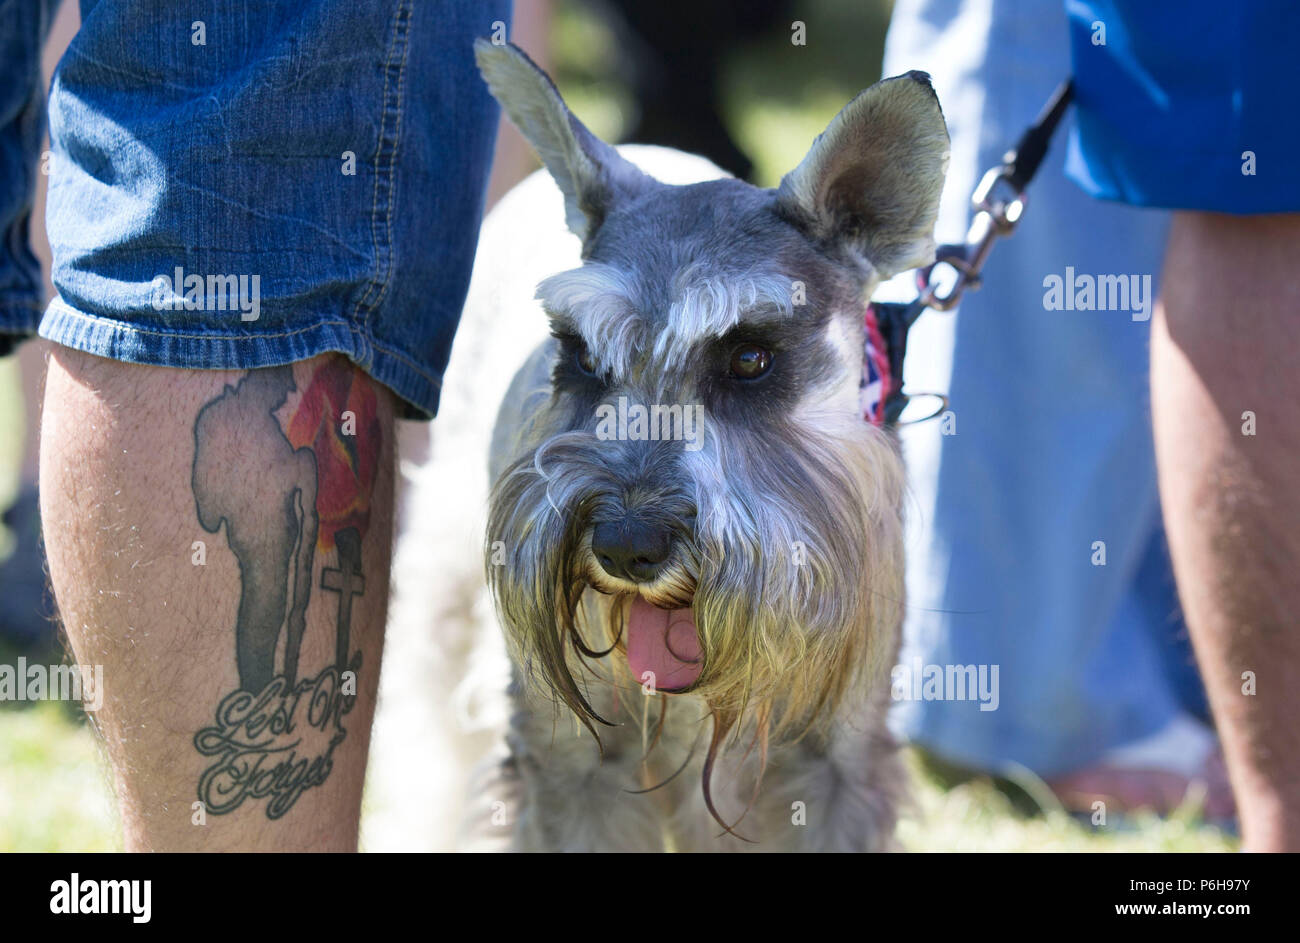 A close up of a participant's tattoo and their dog at an Orange Order march in Cowdenbeath, Fife. Stock Photo